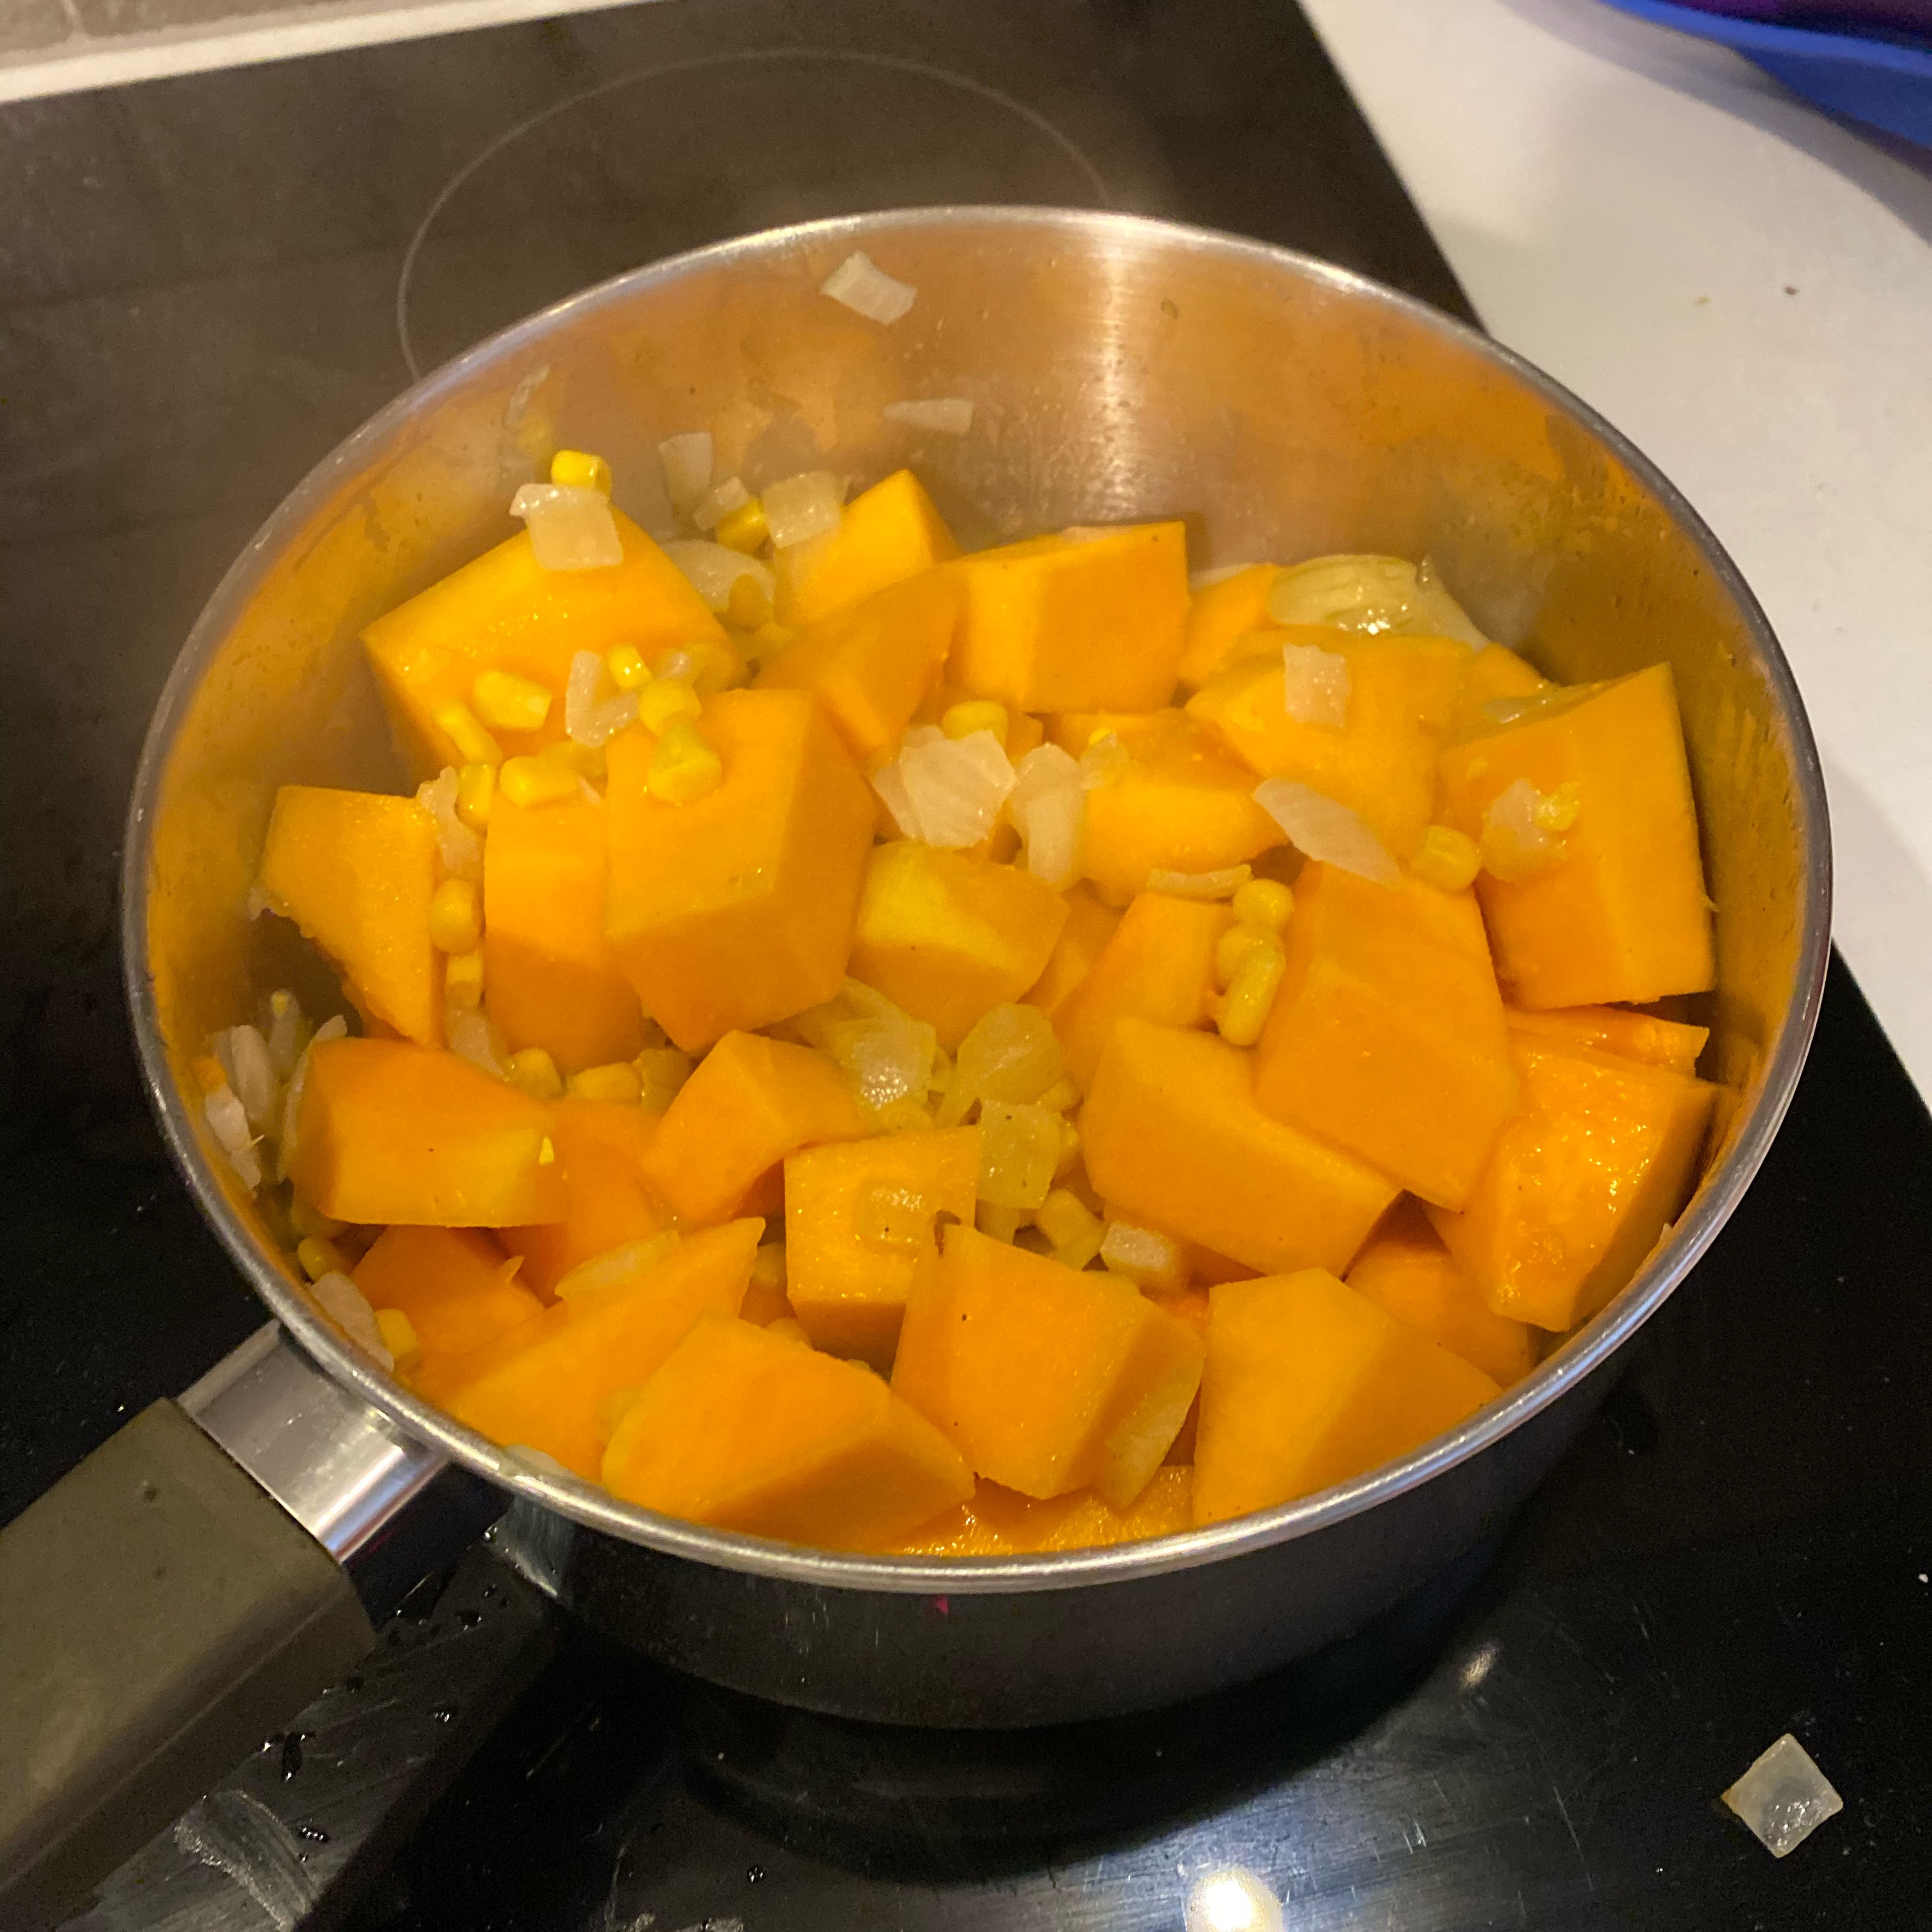 Add the chopped butternut squash and sweetcorn. Stir and season with salt and pepper. Cook on medium heat for about 10 minutes with the lid on.